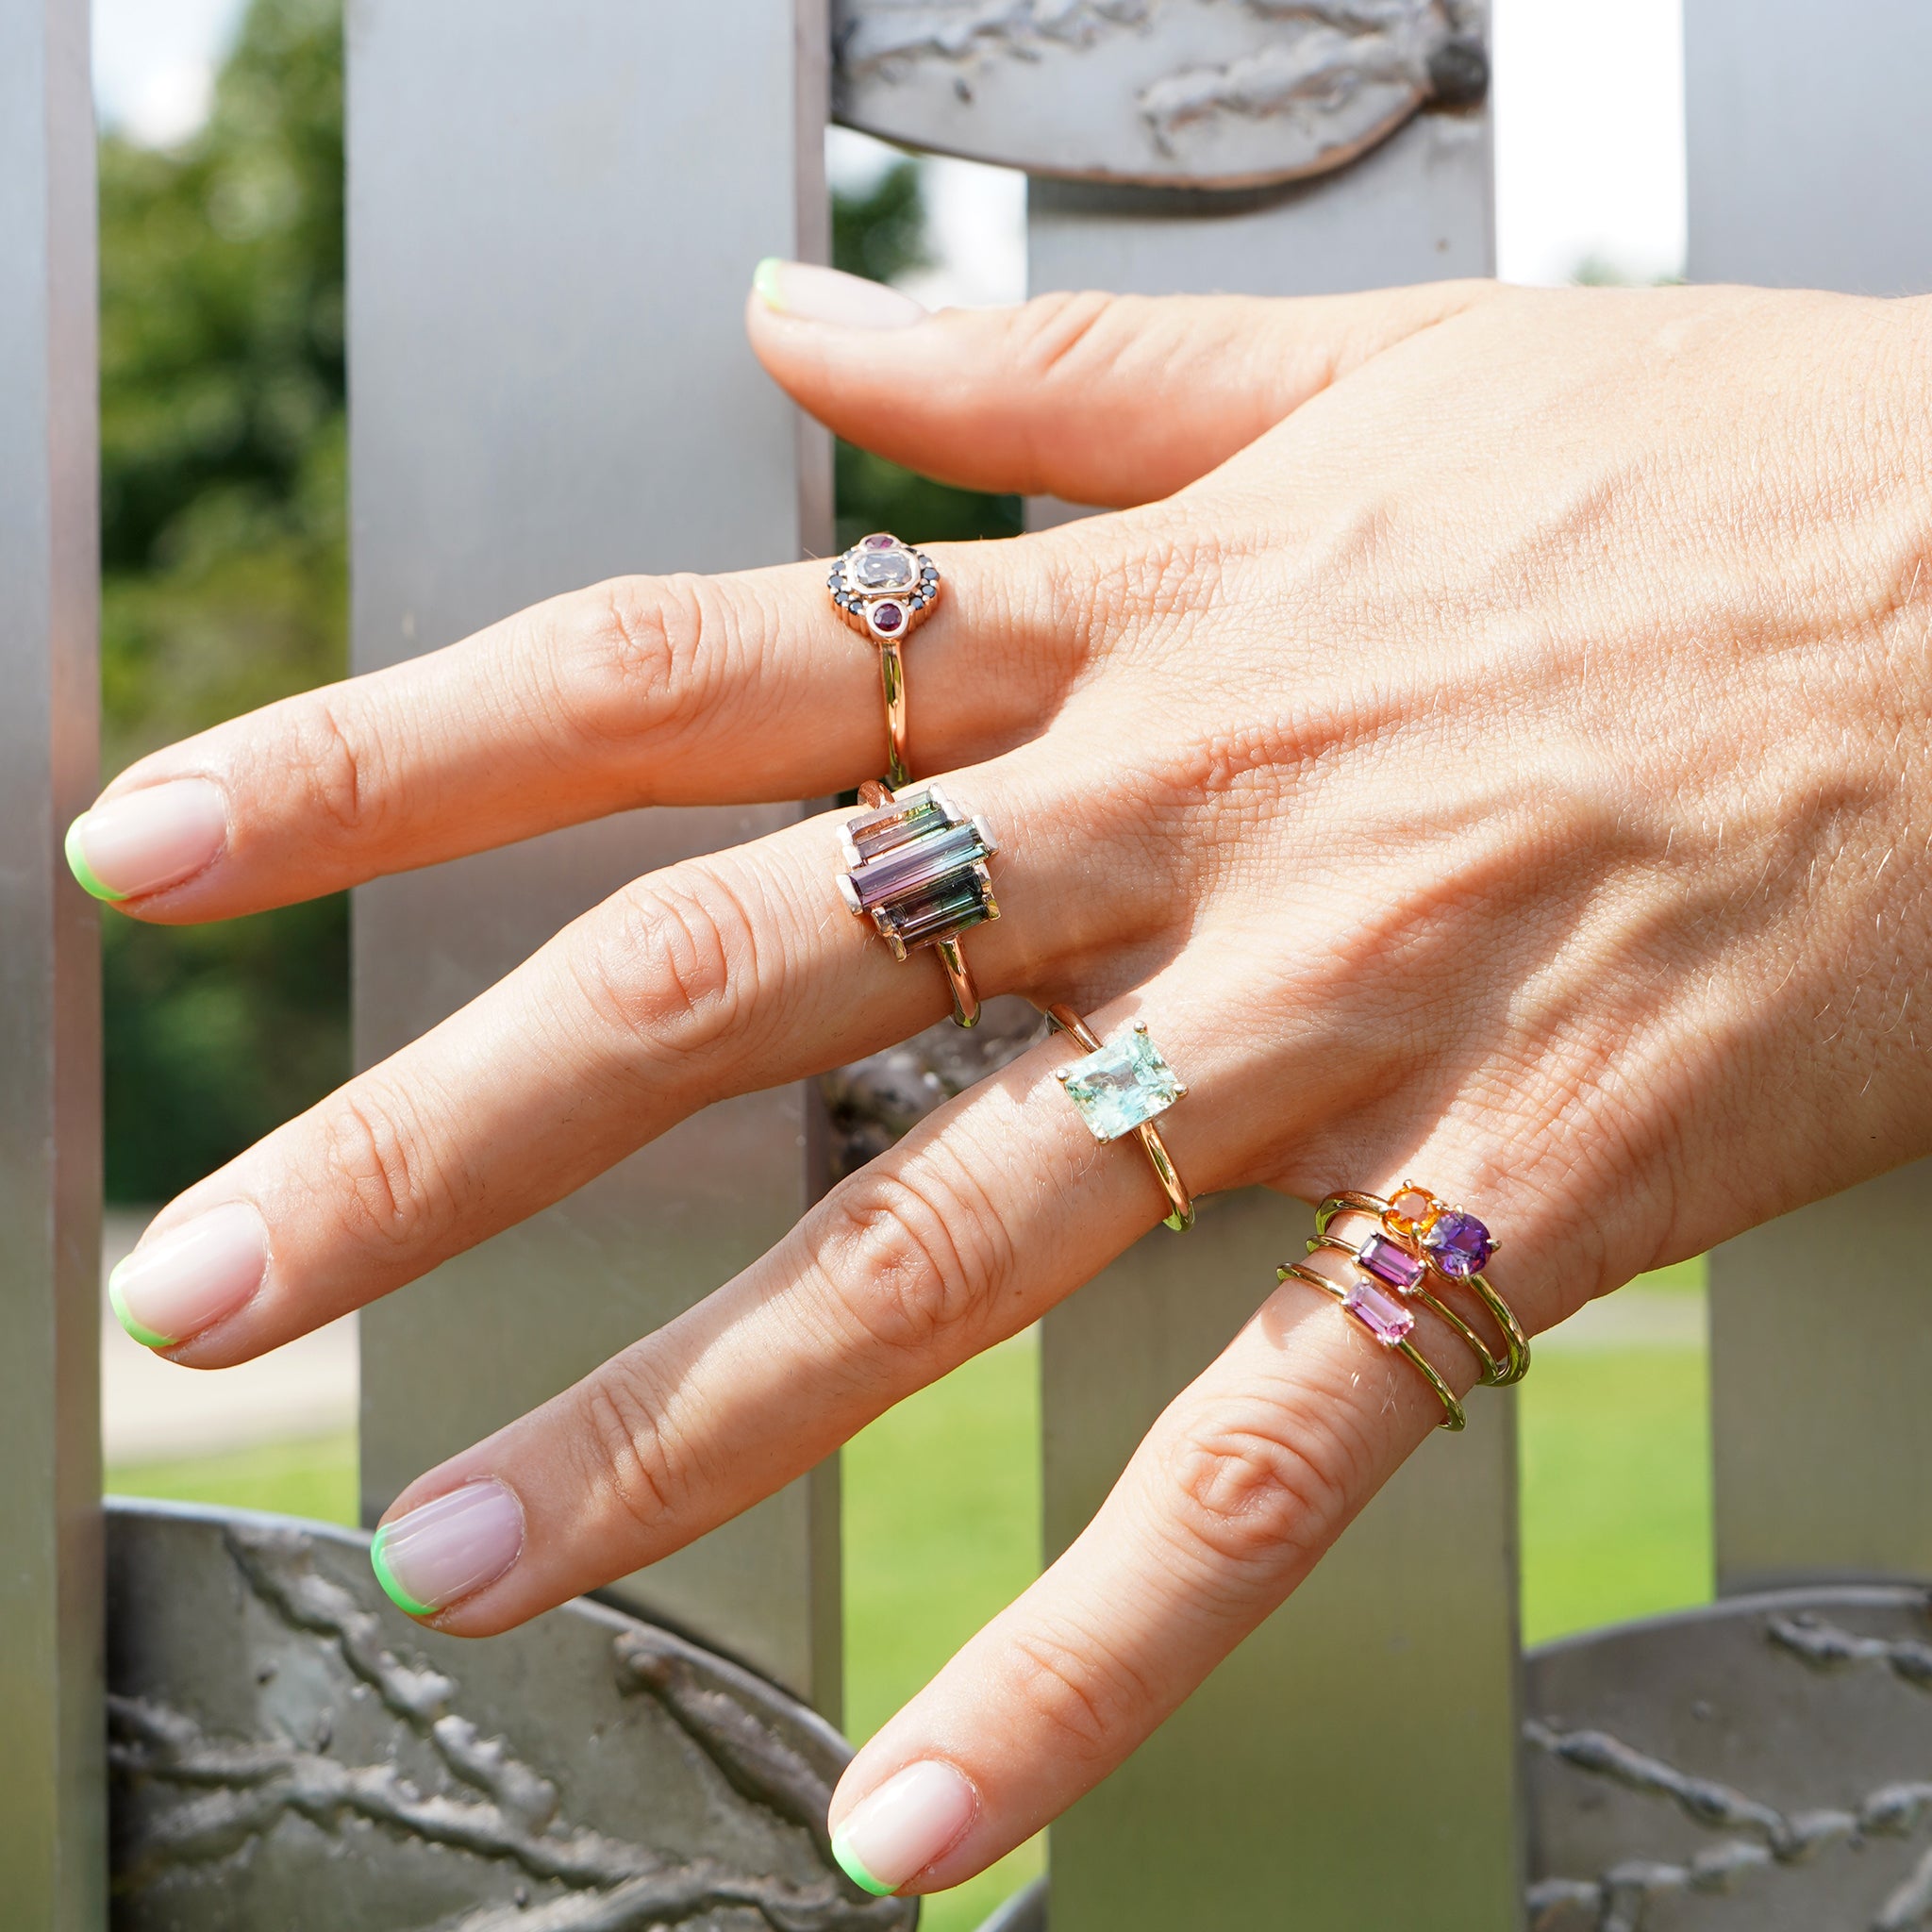 Woman showing off her stylish layered ring look featuring the Iris Flower Ring in solid 14k yellow gold with genuine amethyst and citrine from Lico Jewelry Montreal